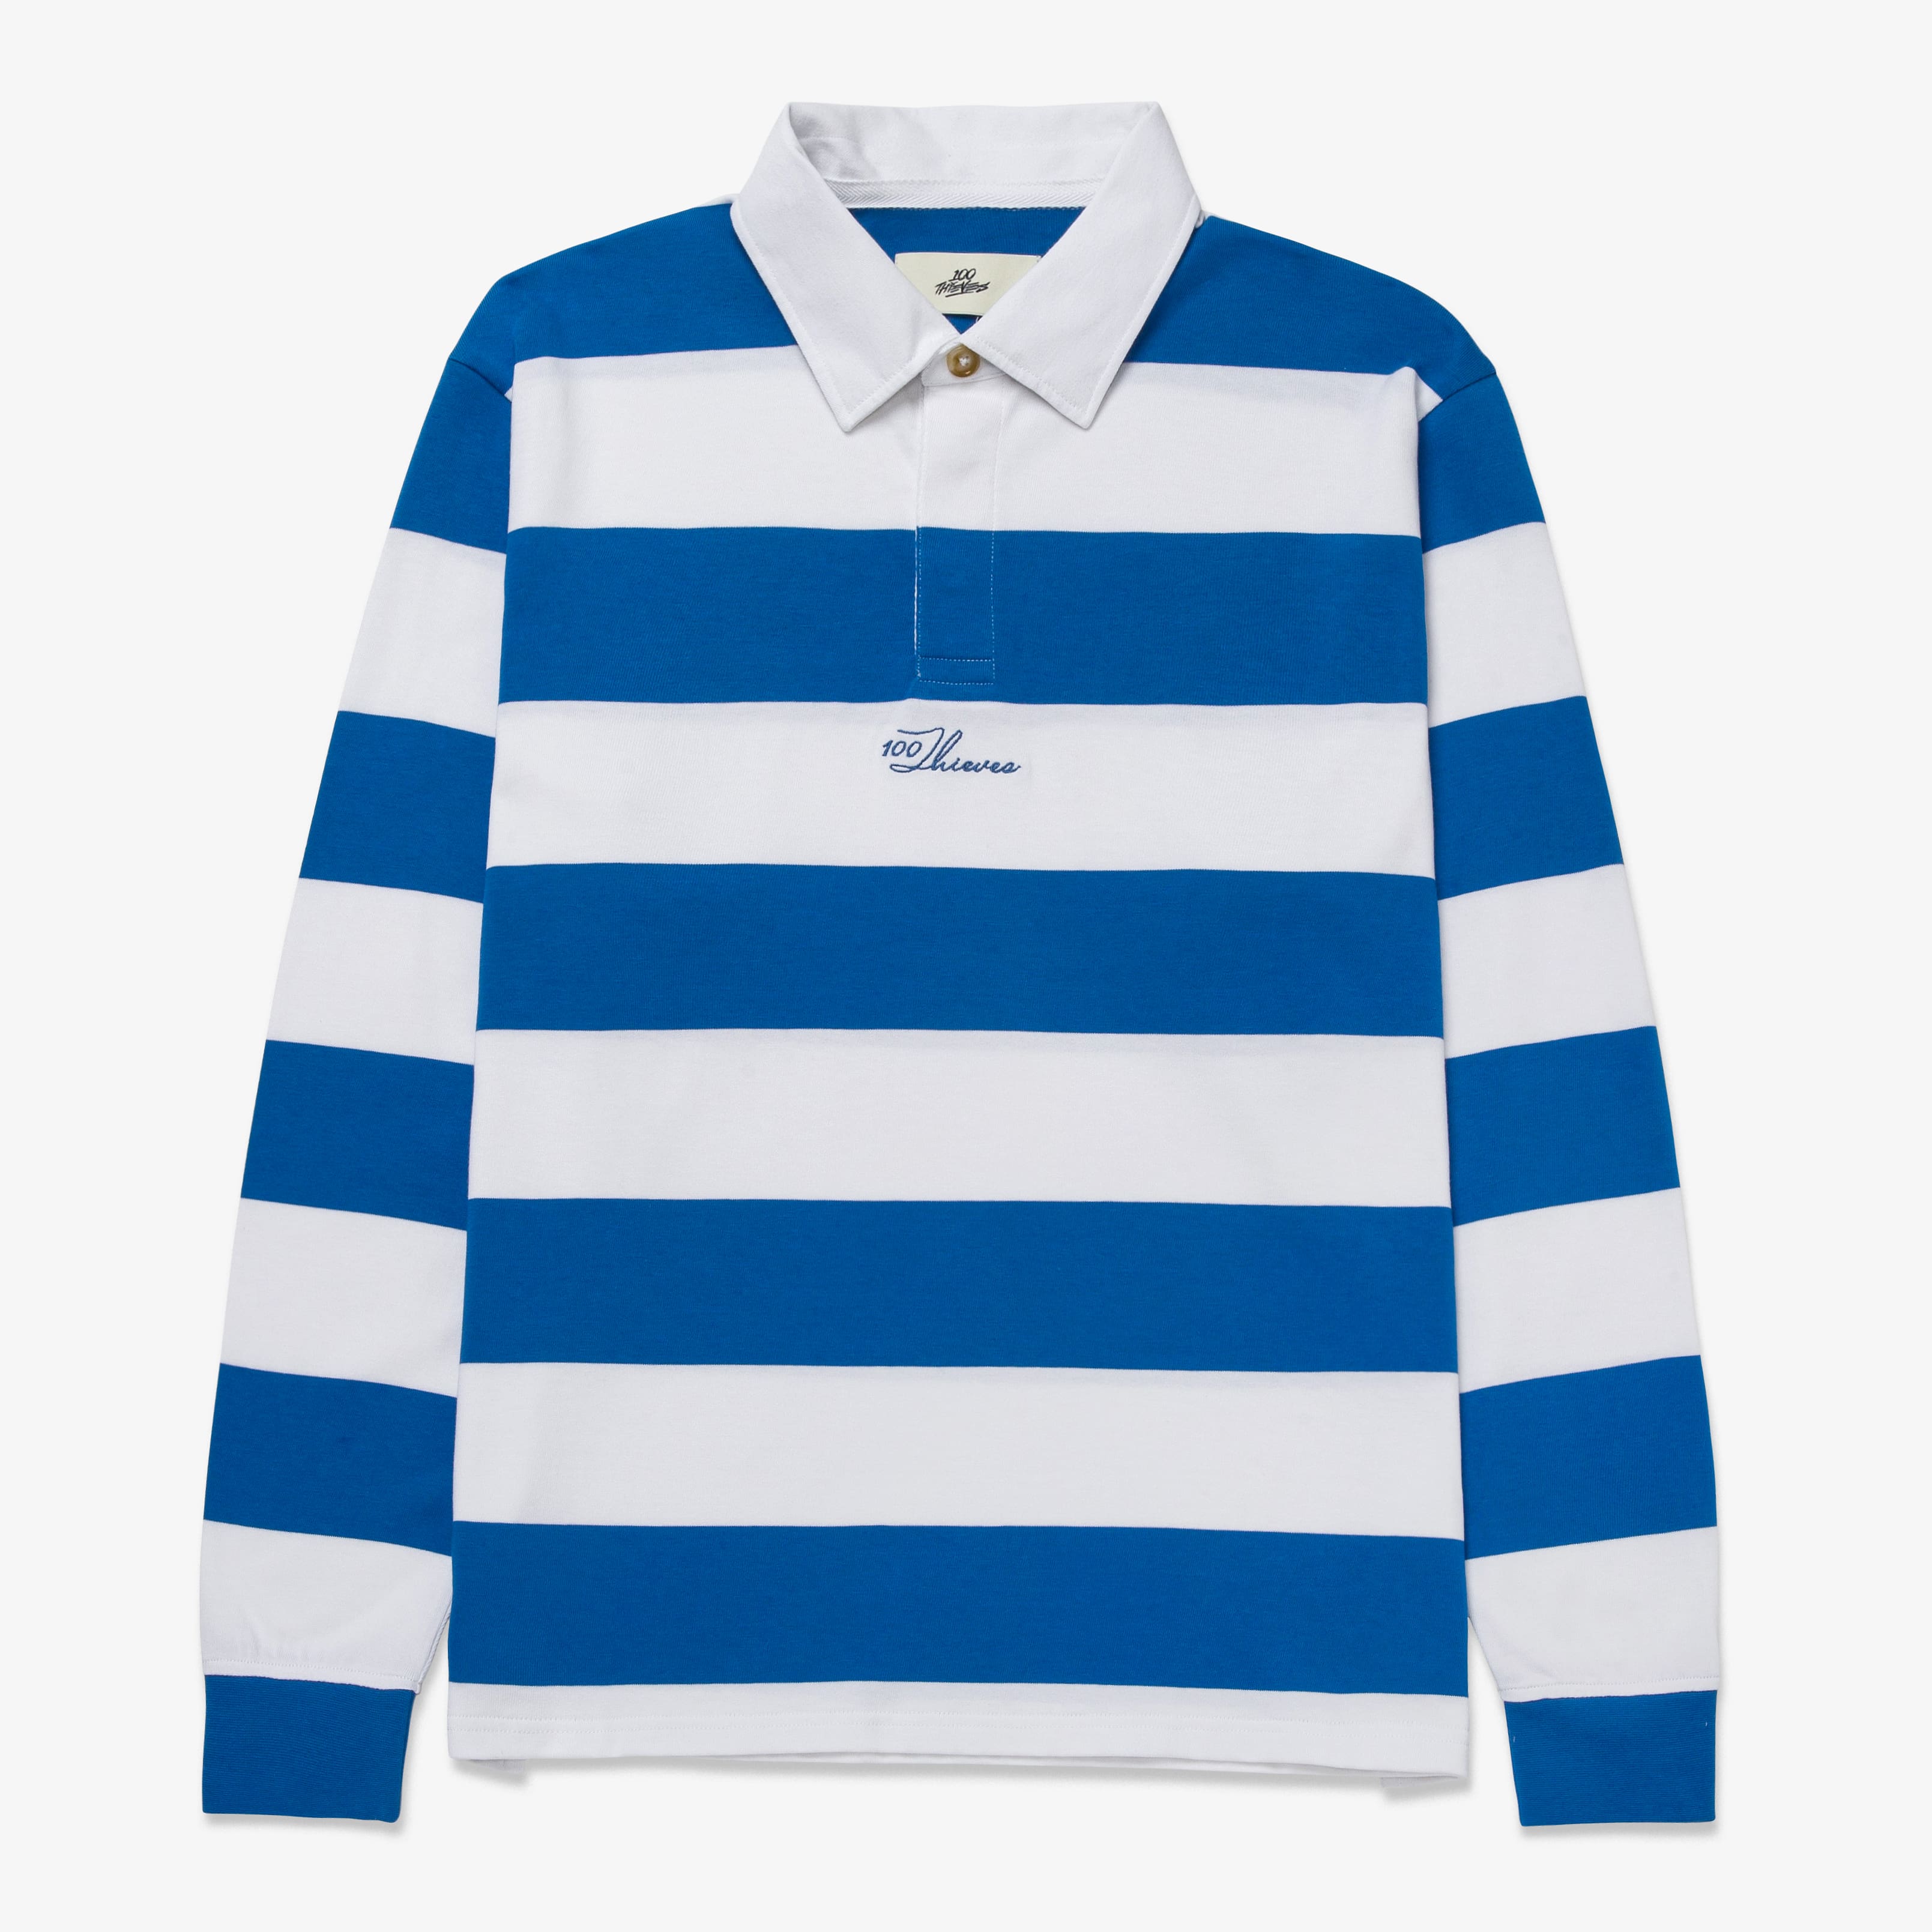 Polo Ralph Lauren Pink/ Navy Rugby Stripe L/S Twill Jersey Sz L (New